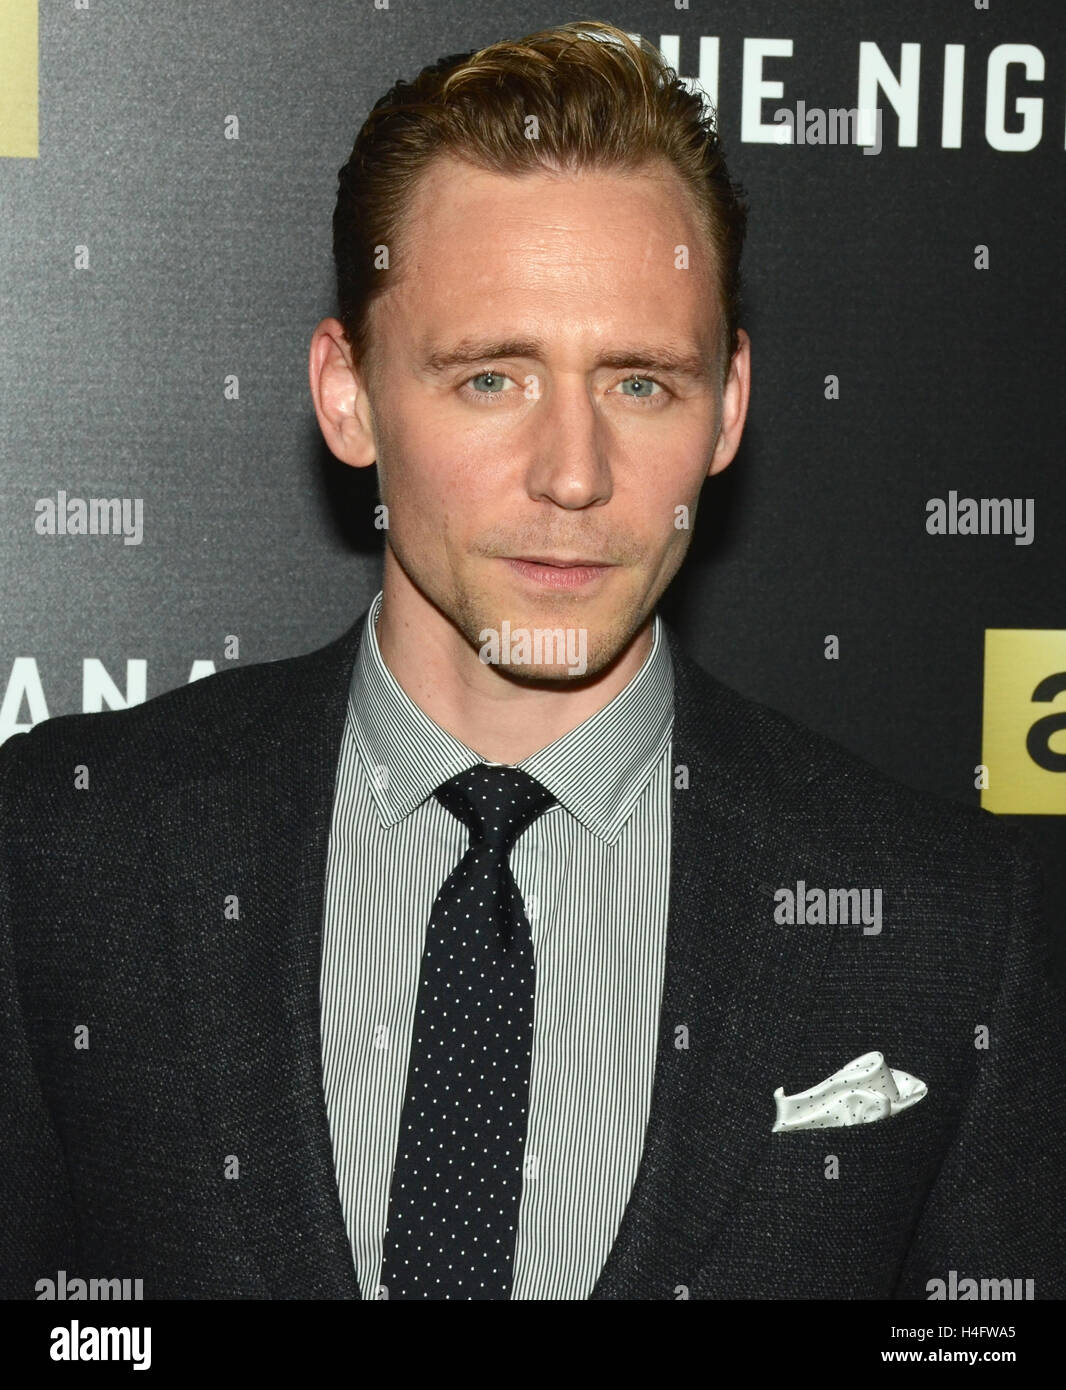 Tom Hiddleston arrives for the Premiere Of AMC's "The Night Manager" held at DGA Theater on April 5, 2016 in Los Angeles, California. Stock Photo